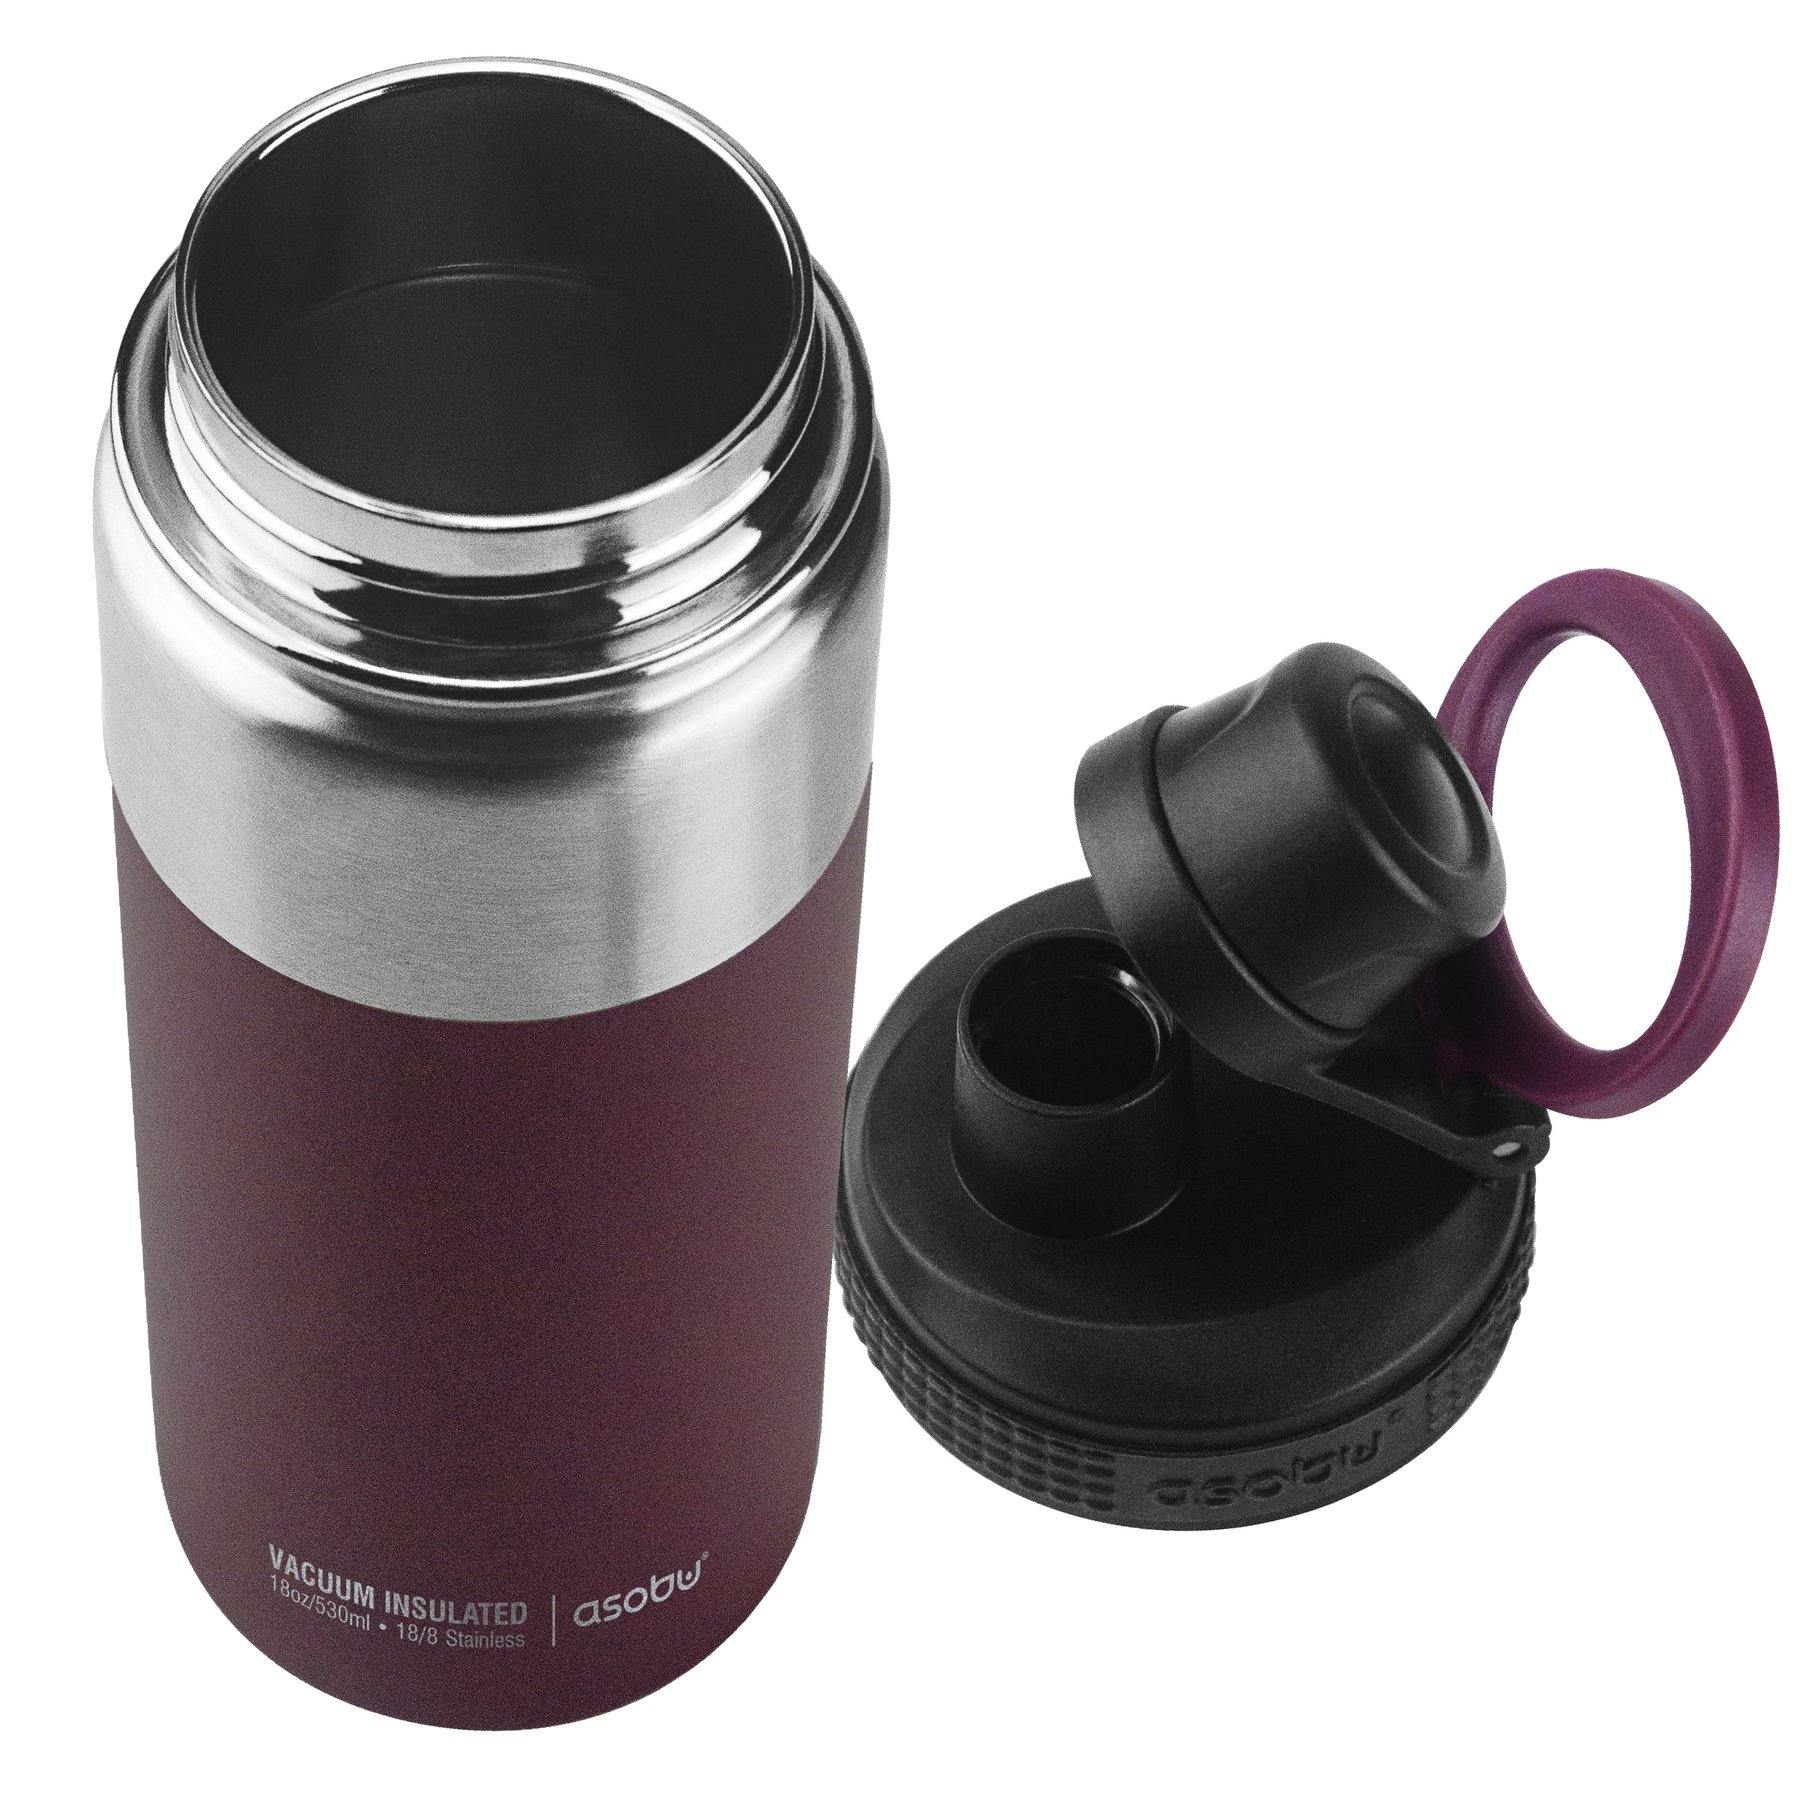 Asobu | Alpine Flask Thermos - Insulated & Double Walled - 18 oz, Thermos, Asobu, Defiance Outdoor Gear Co.